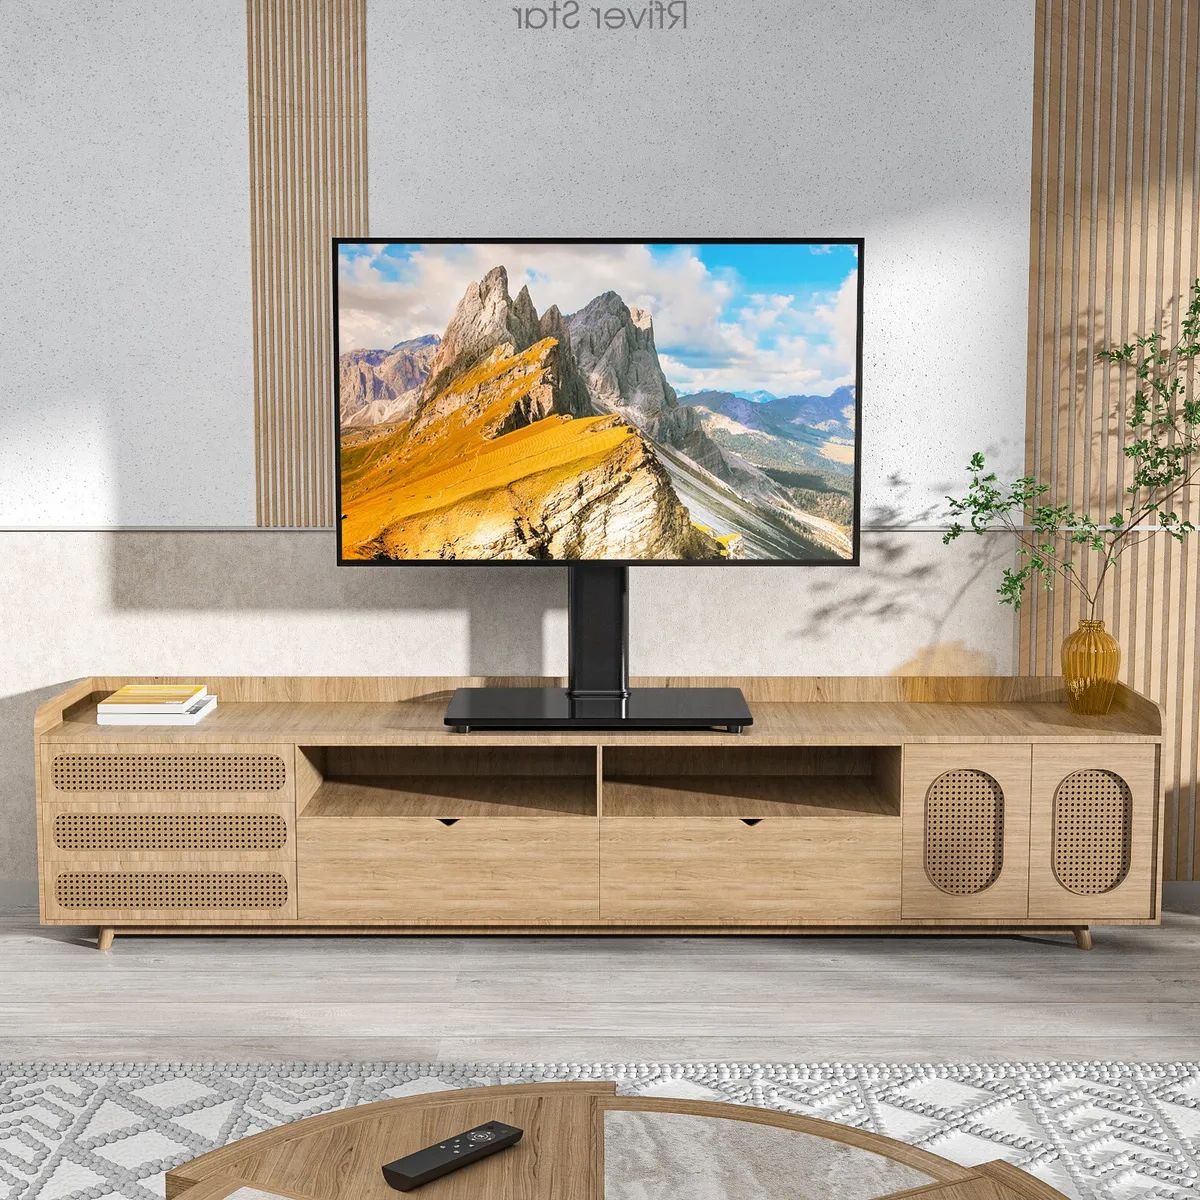 Universal Swivel Tabletop Tv Stand For Flat Screens 23 24 26 32 39 40 43  Inch Tv | Ebay Inside Universal Tabletop Tv Stands (Gallery 4 of 20)